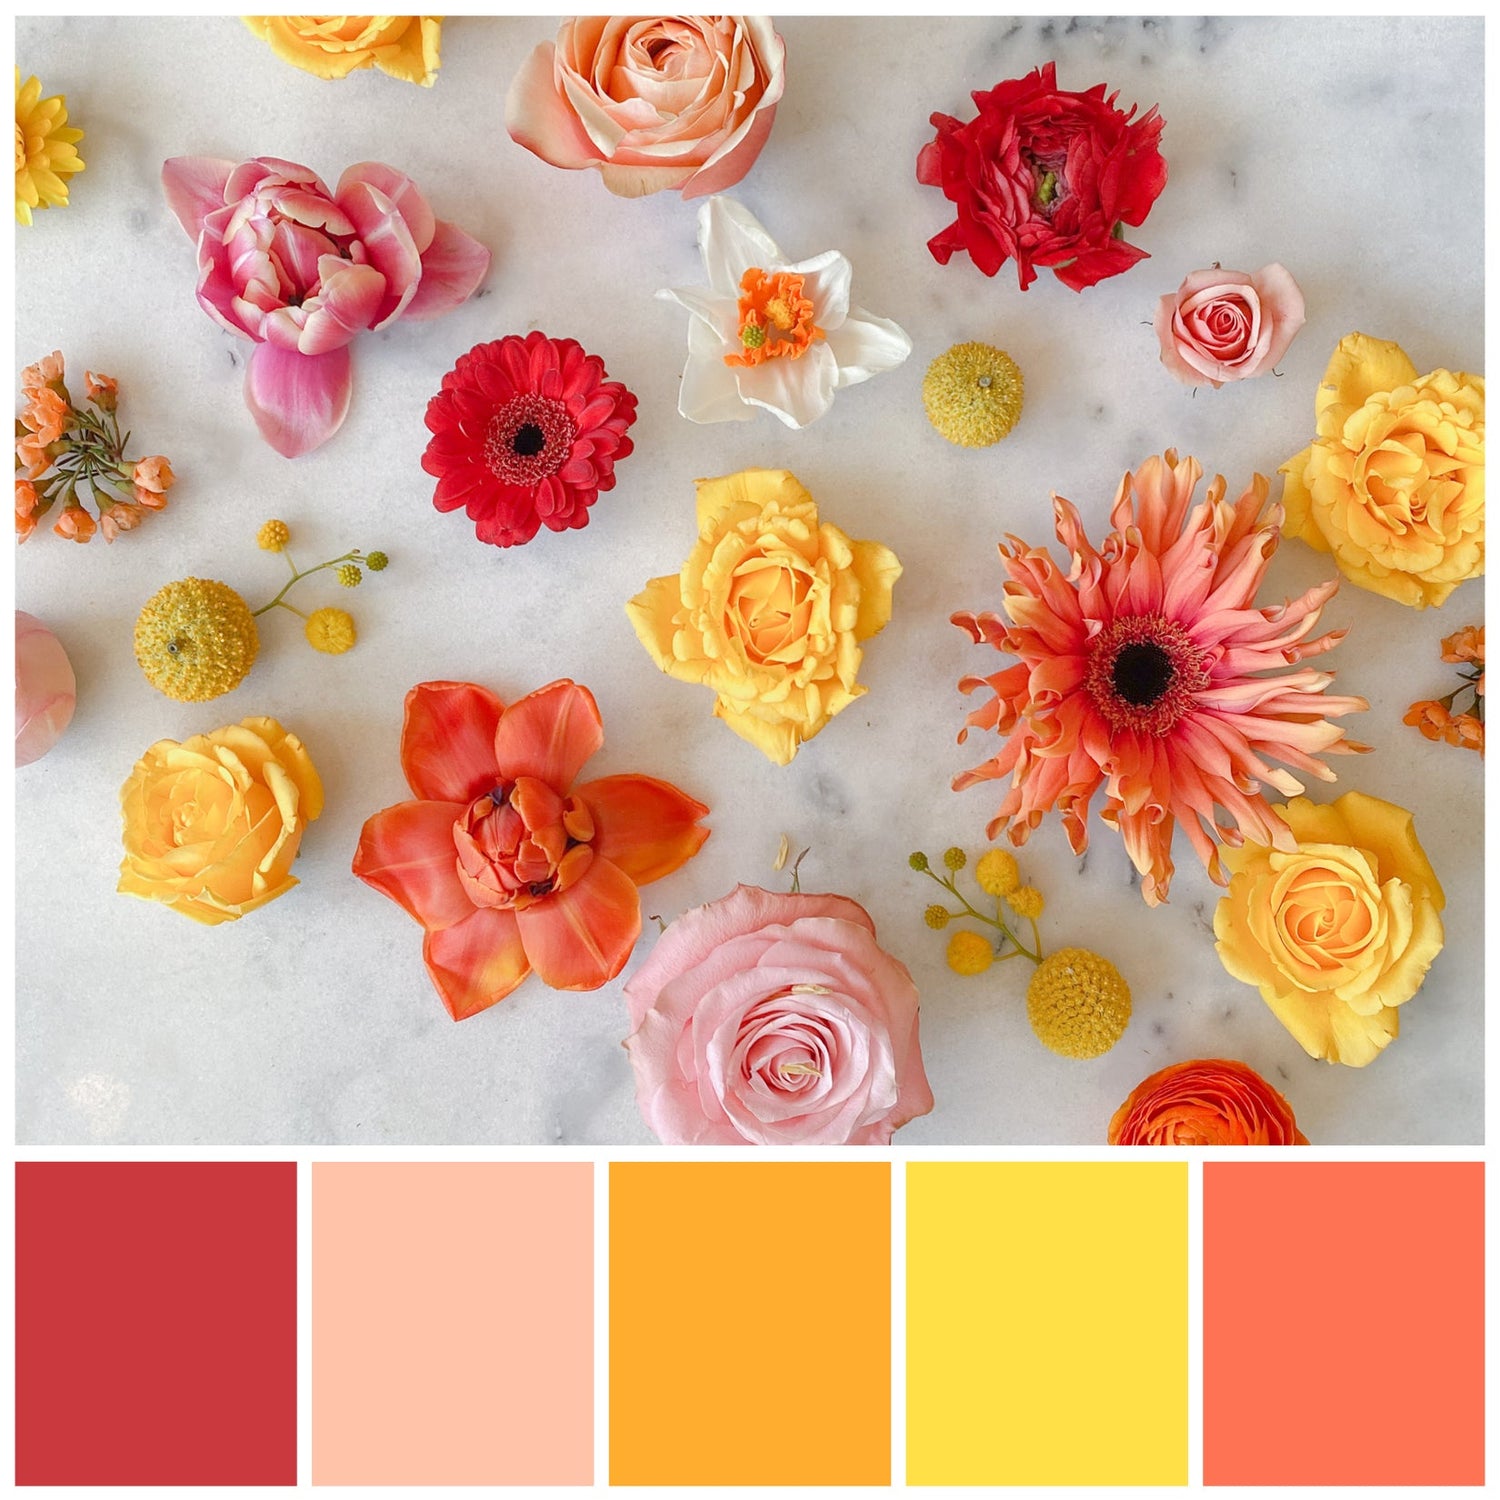 A color palette option: a flatlay of pastel-colored blooms on a marble background. The colors included are red, orange, peach, yellow, and warm pinks.